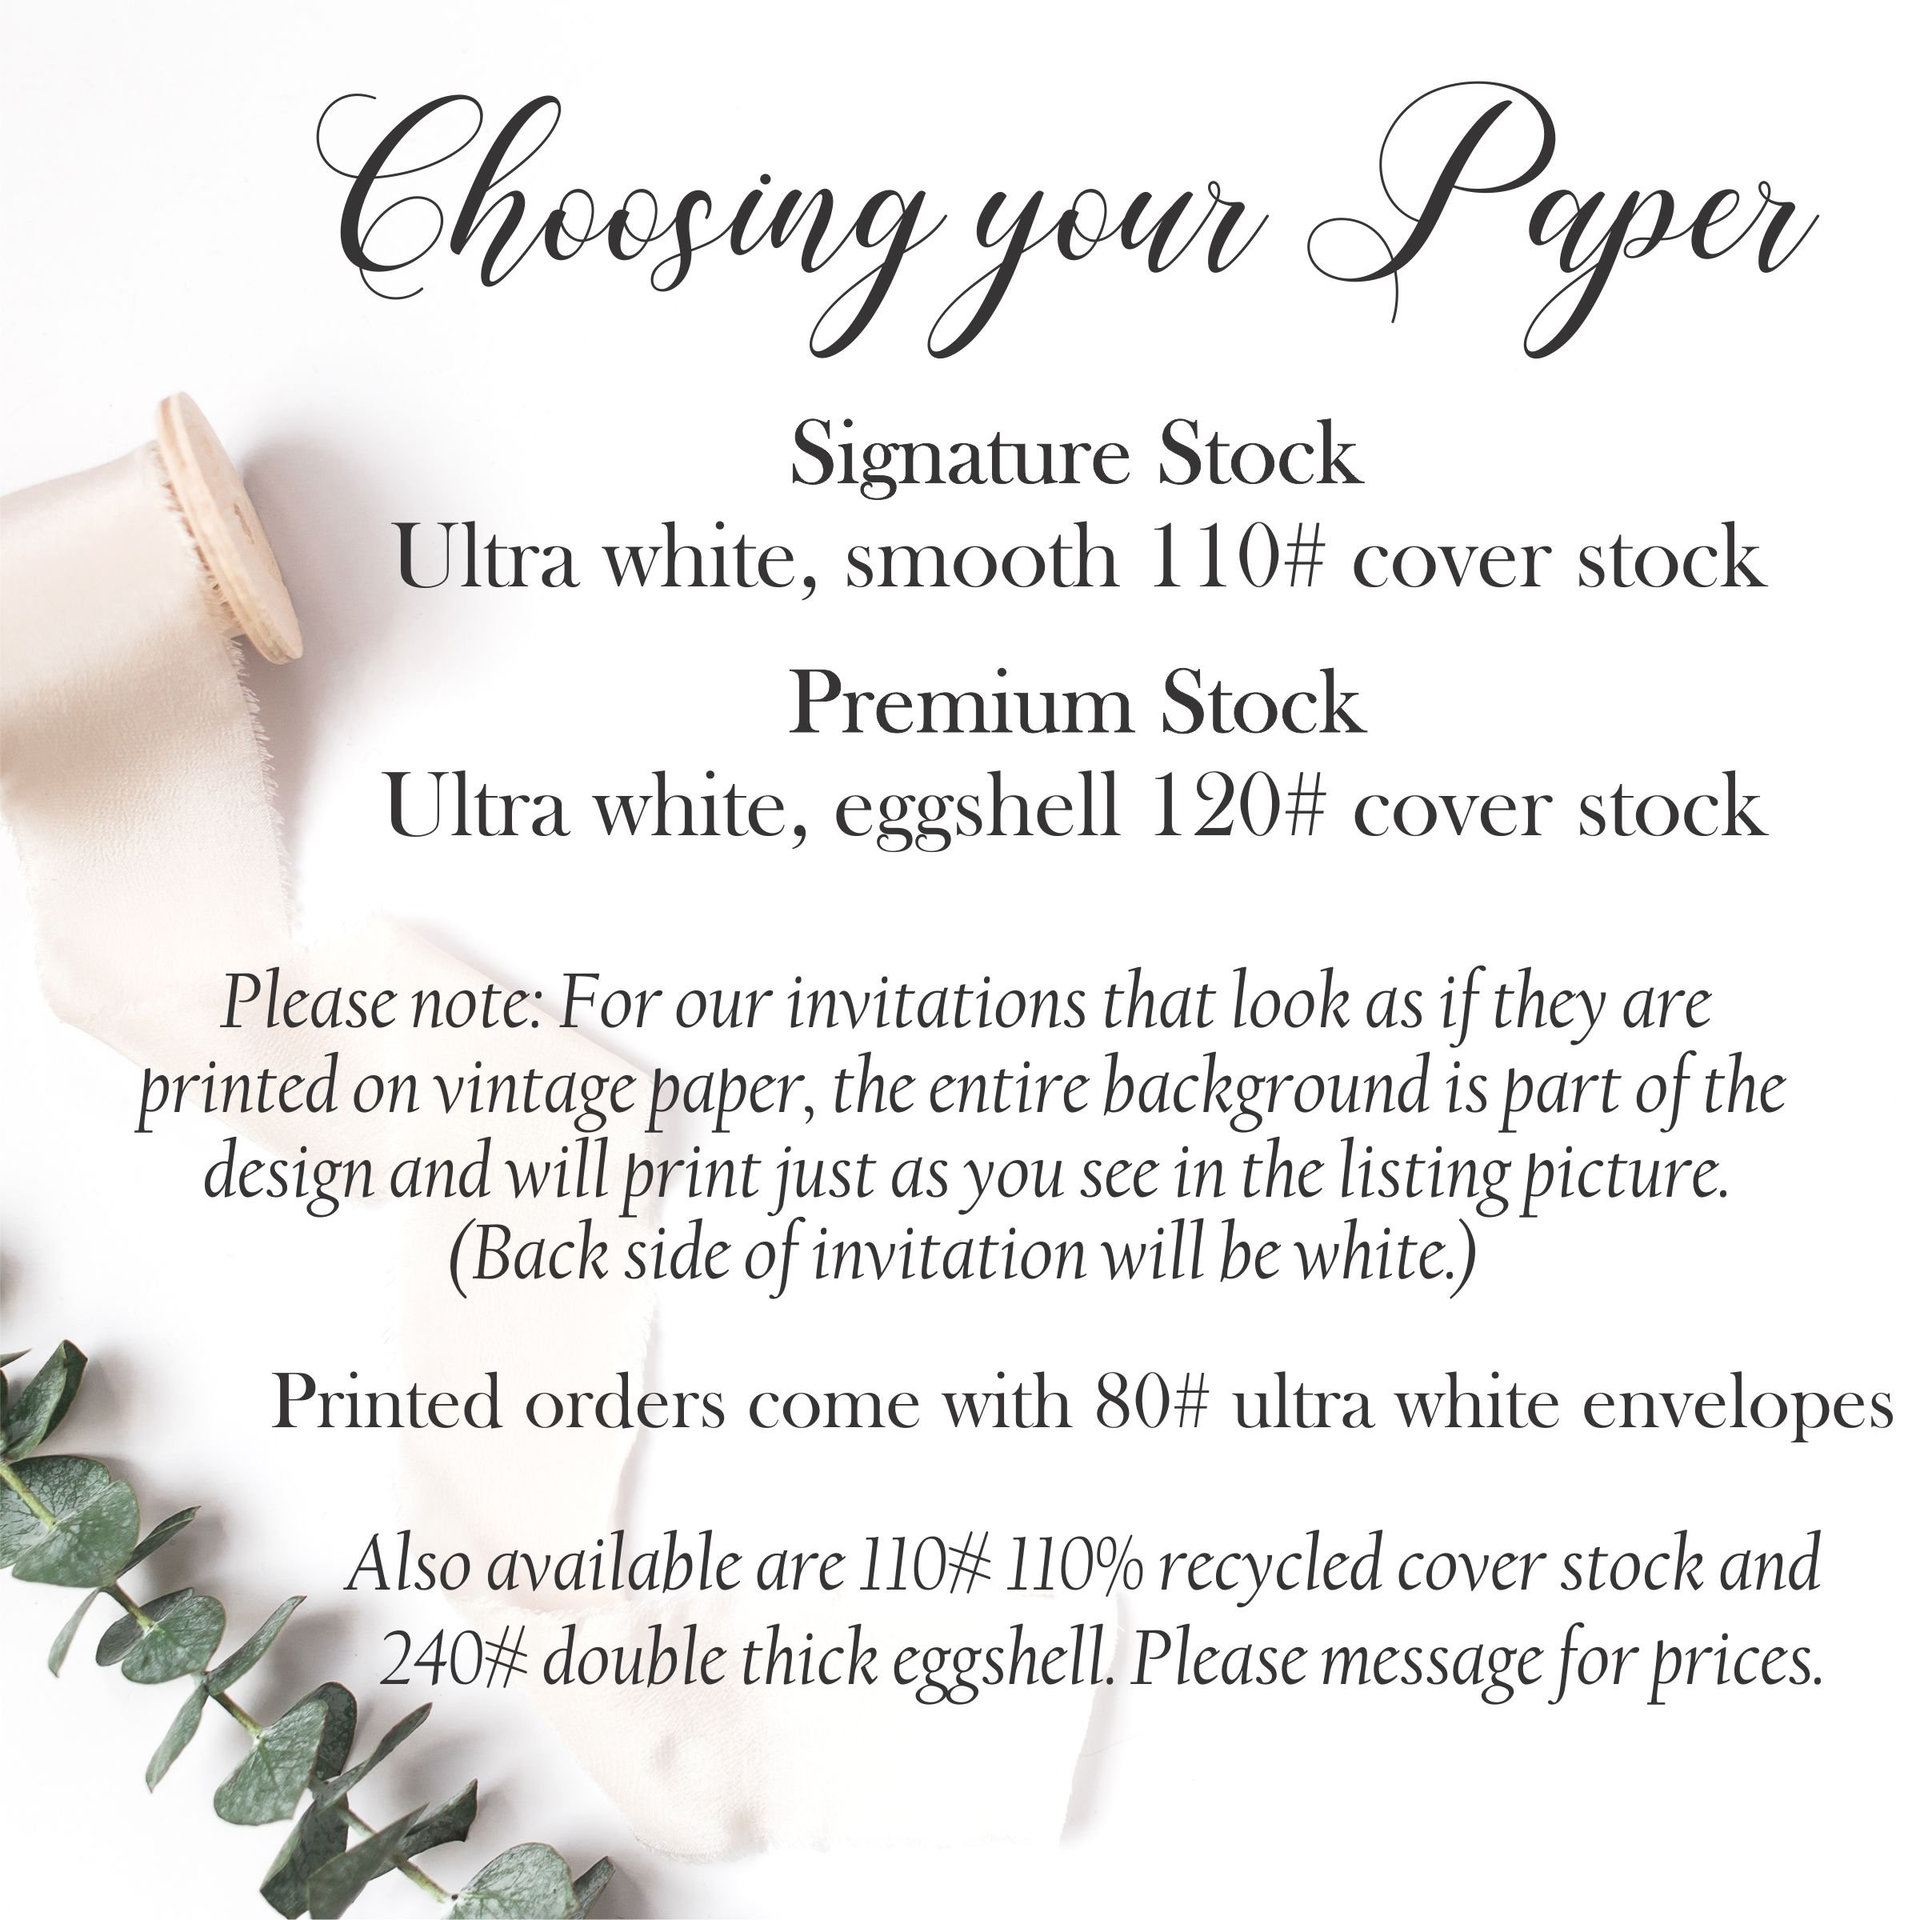 Pine and Holly Wedding Invitation, Winter or Christmas, Includes RSVP Card